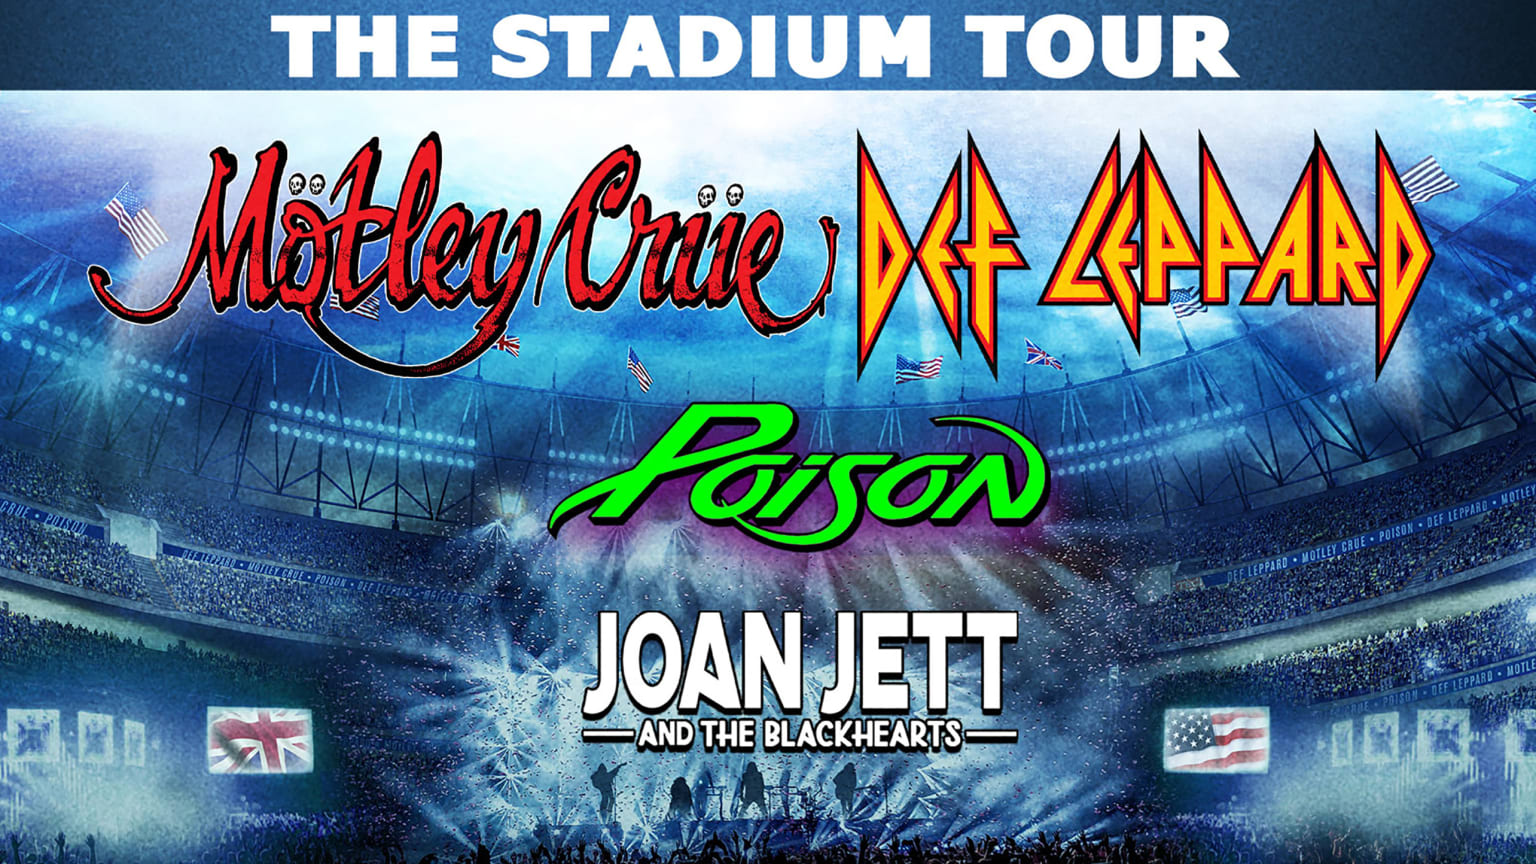 Def Leppard and Motley Crue Concert featuring Poison and Joan Jett ...